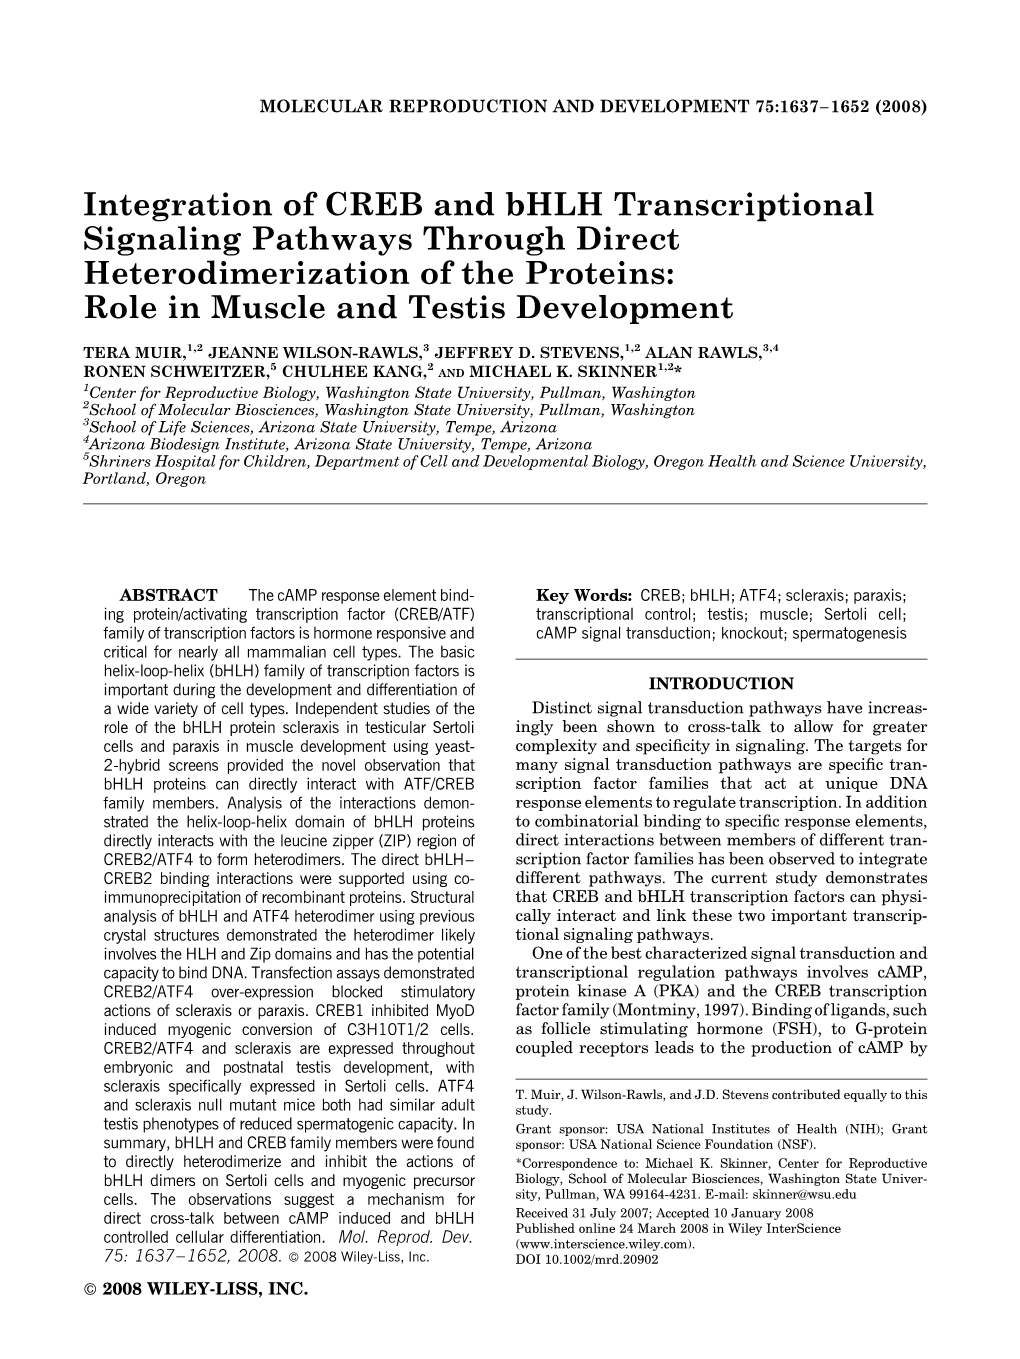 Integration of CREB and Bhlh Transcriptional Signaling Pathways Through Direct Heterodimerization of the Proteins: Role in Muscle and Testis Development